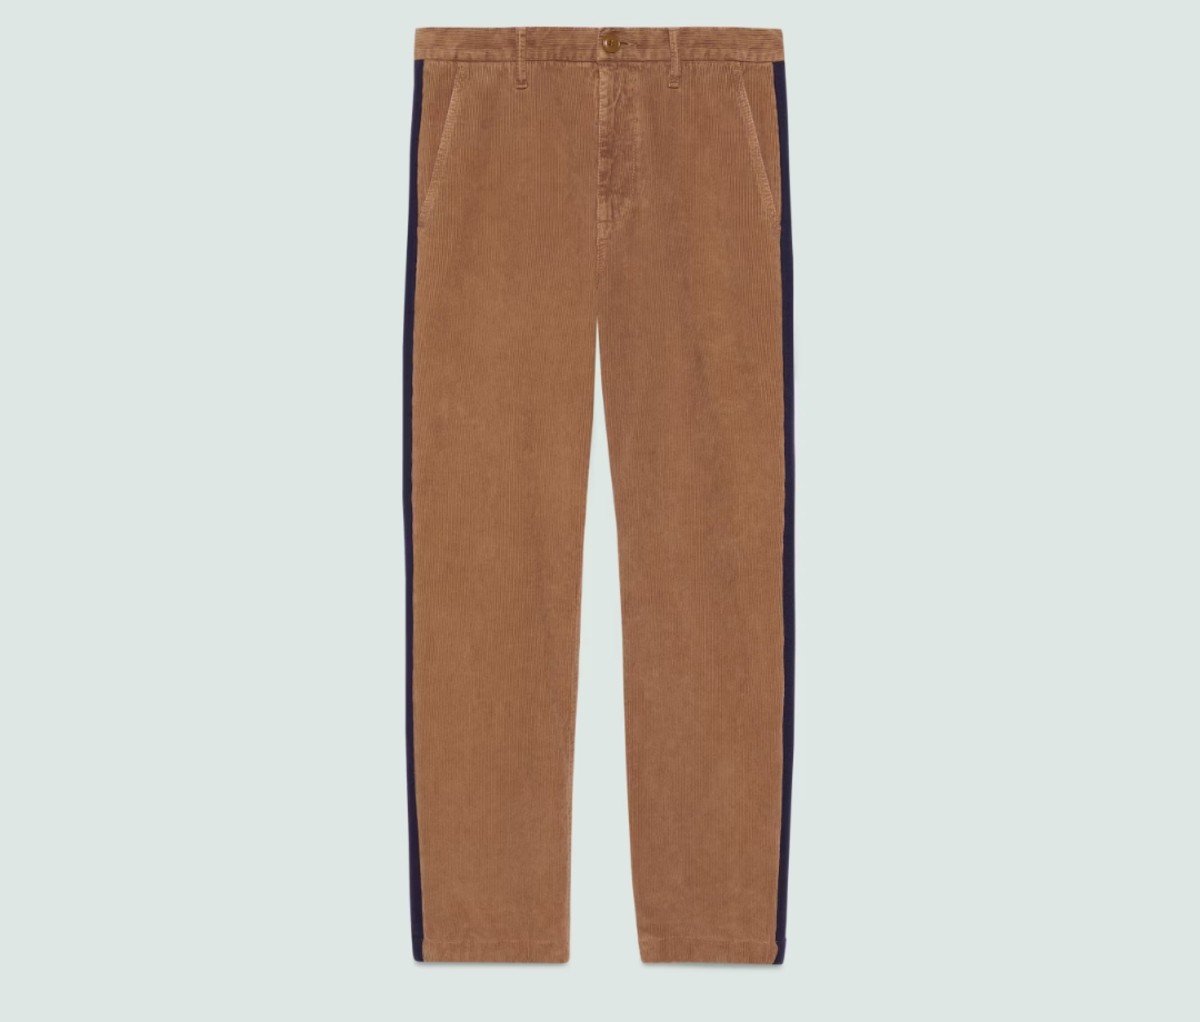 Check styling ideas for「Wide-Fit Corduroy Pants」